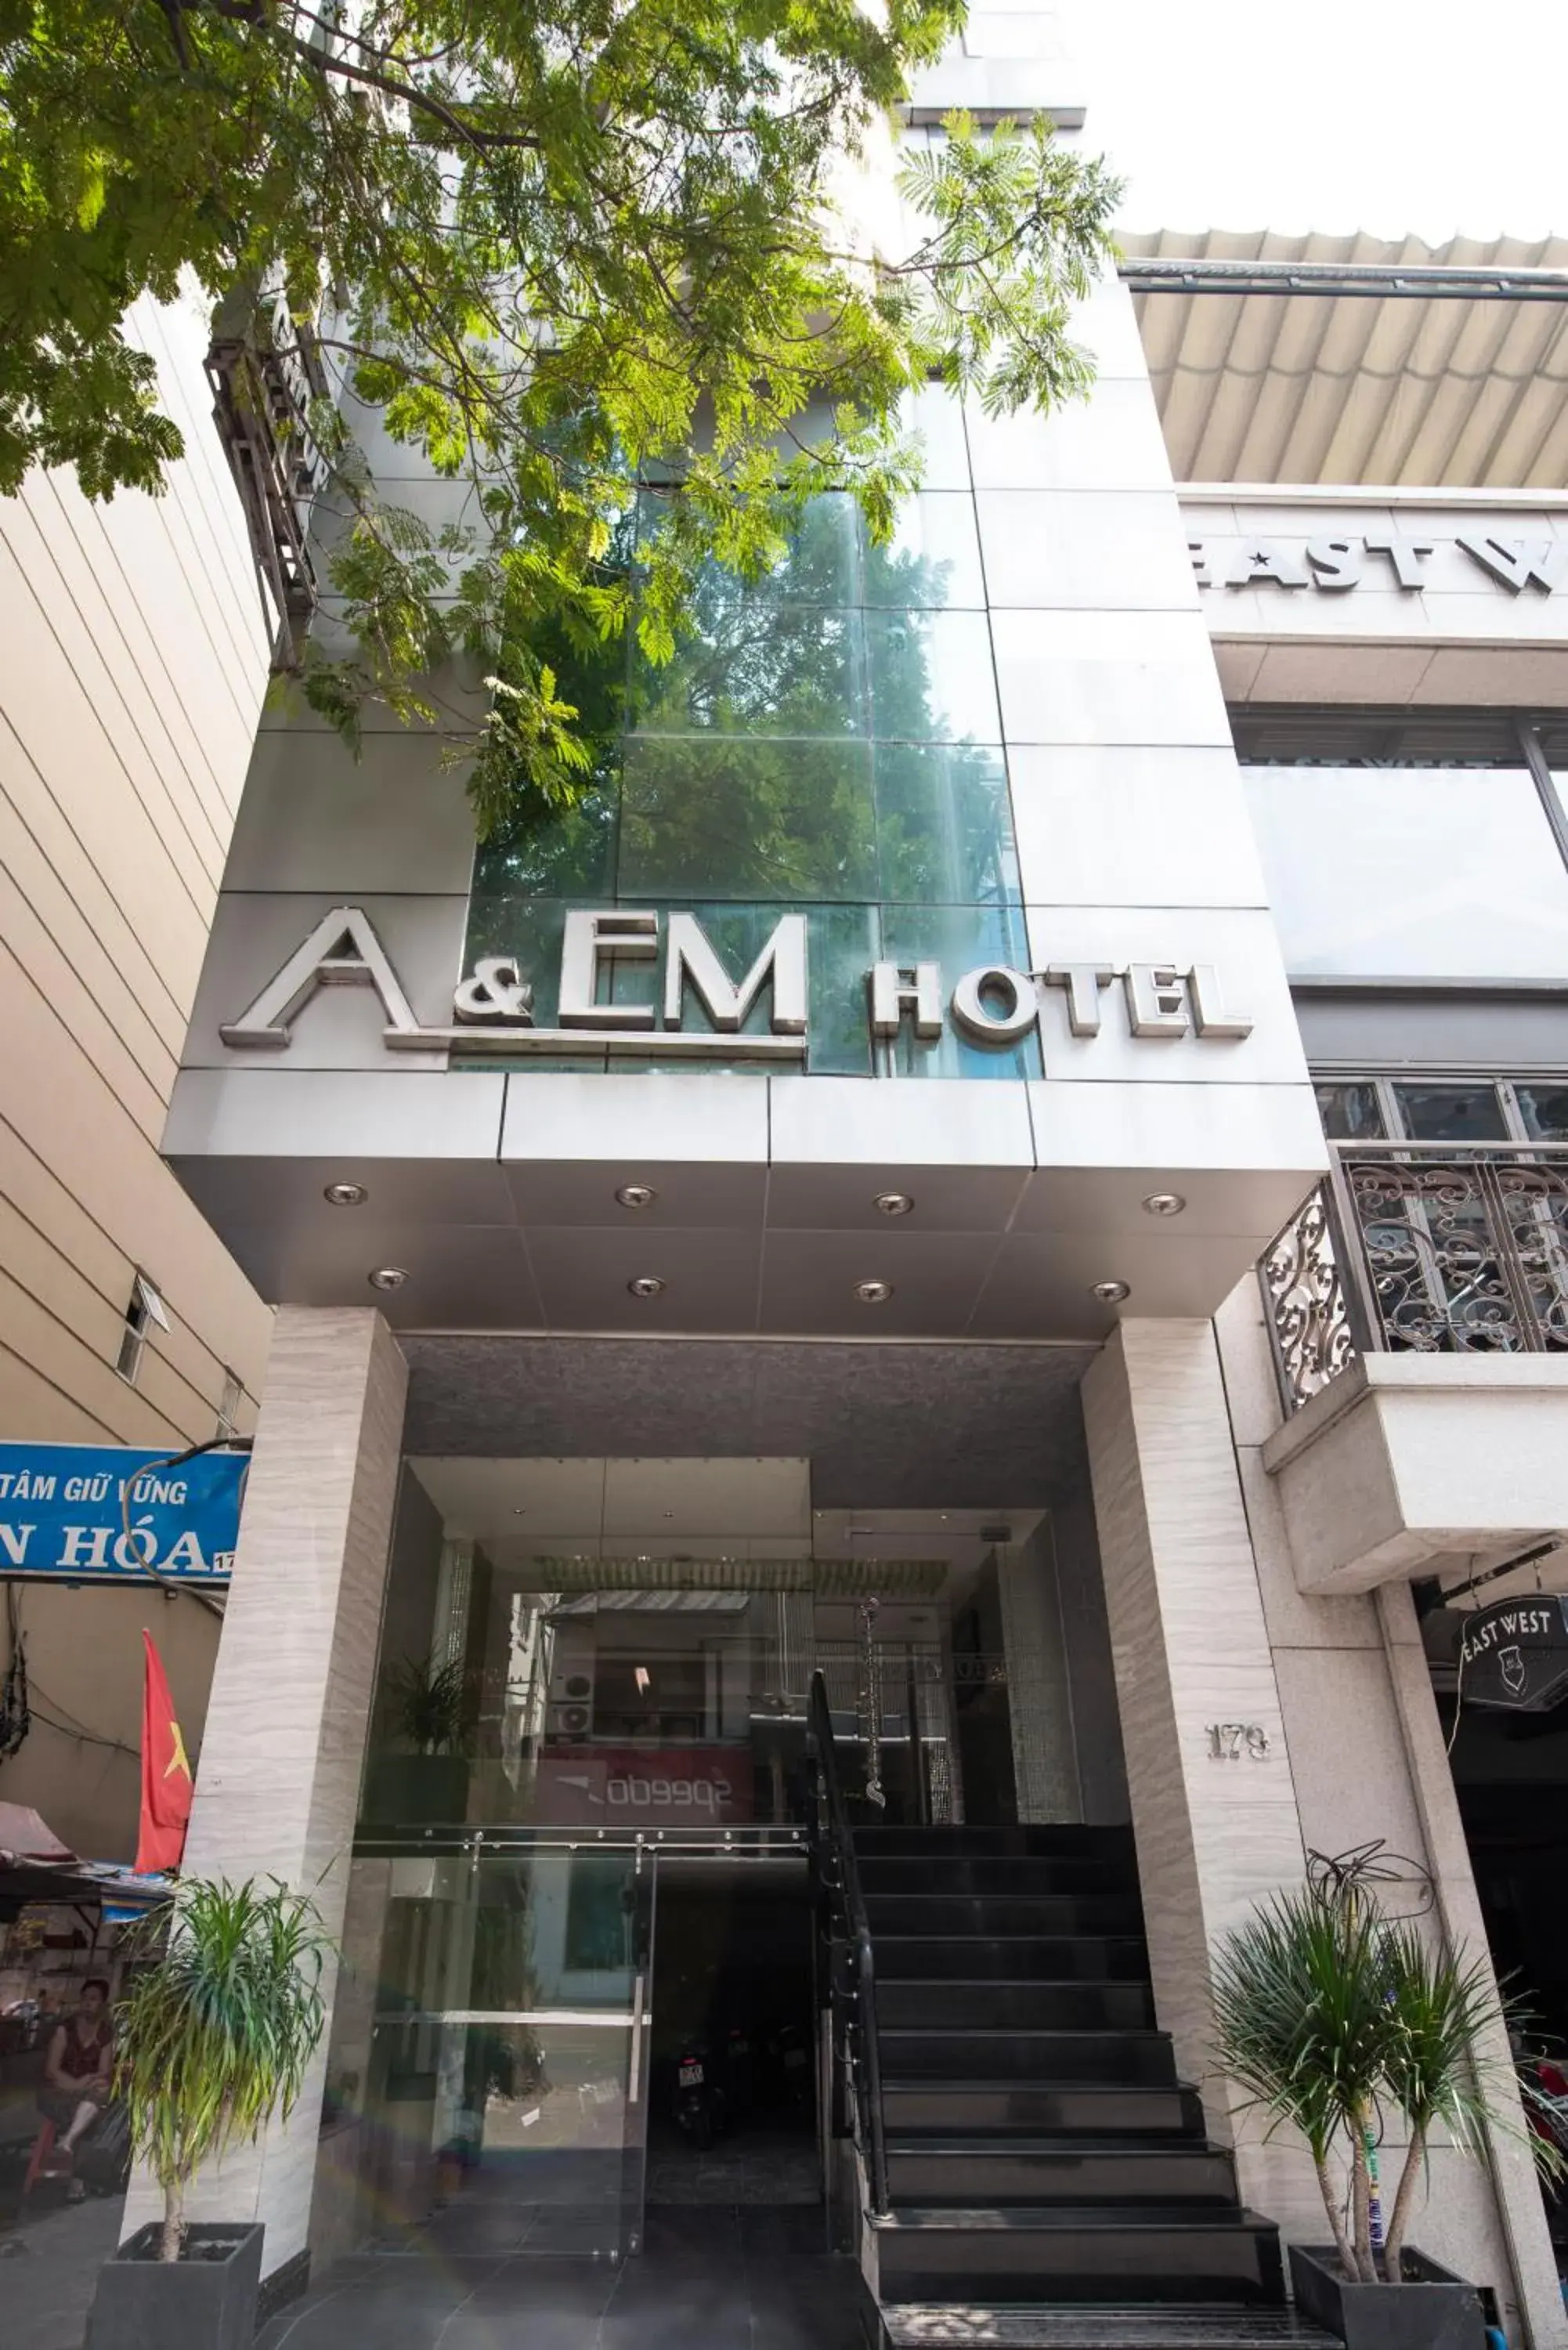 Facade/entrance in A&EM - The Petit Hotel